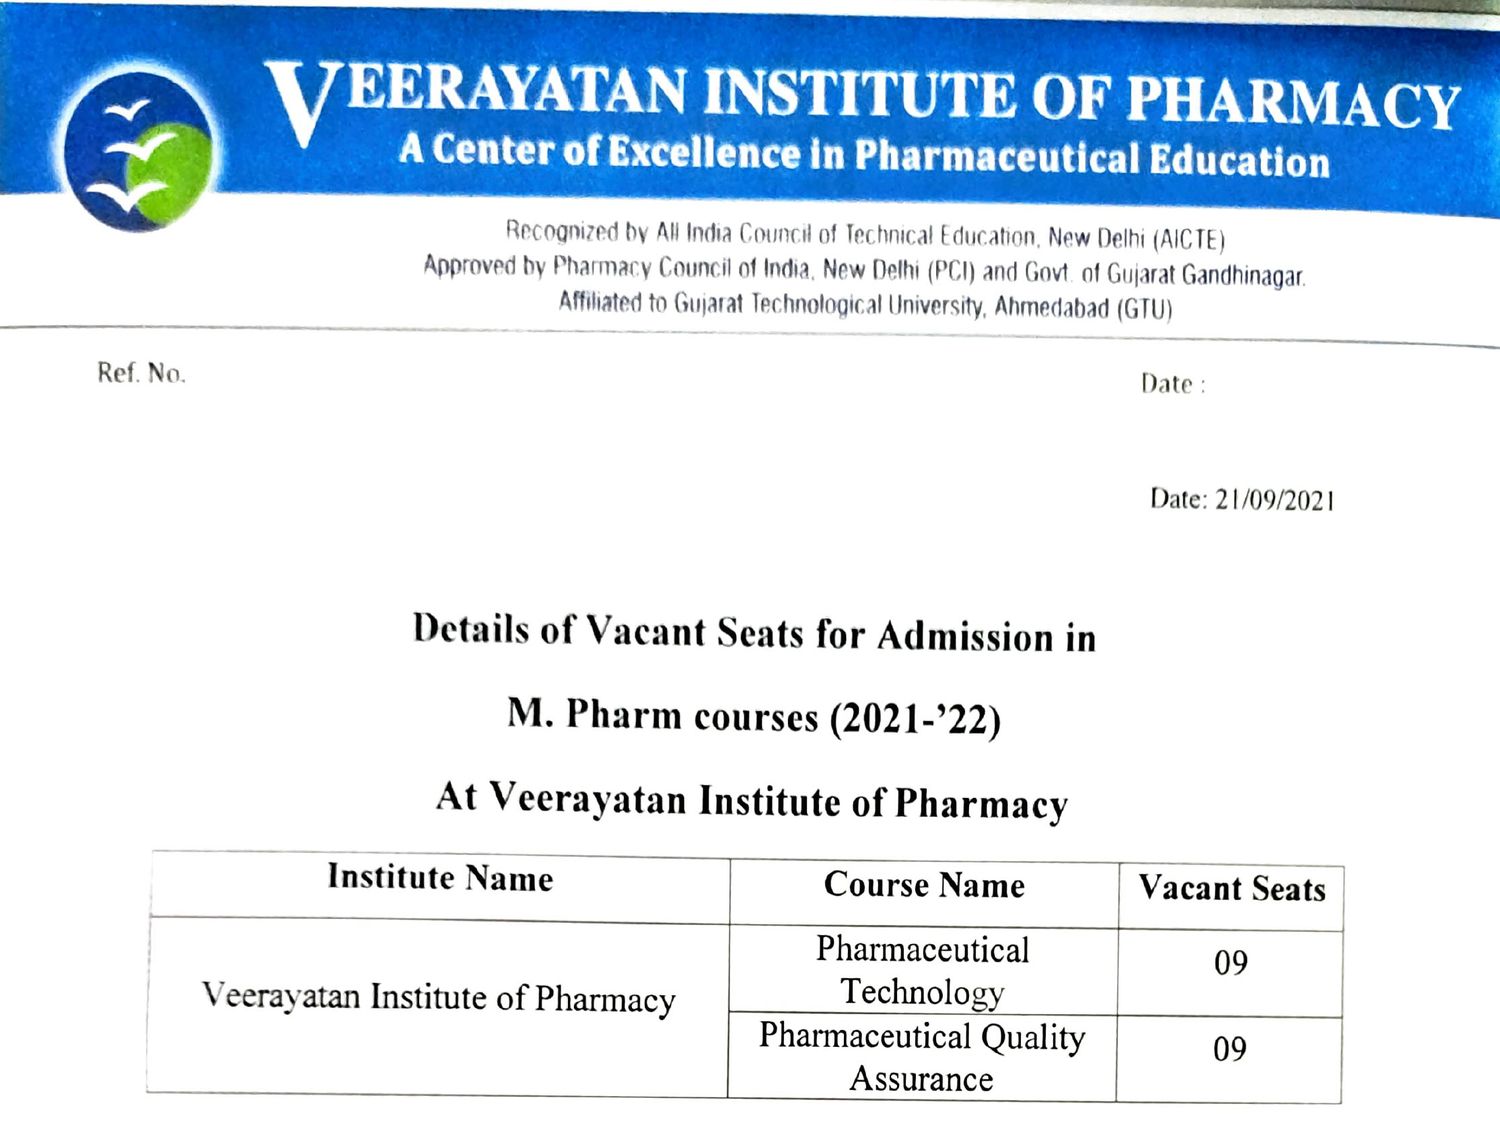 Vacant Seats Admission Schedule for M.Pharm 2021-22